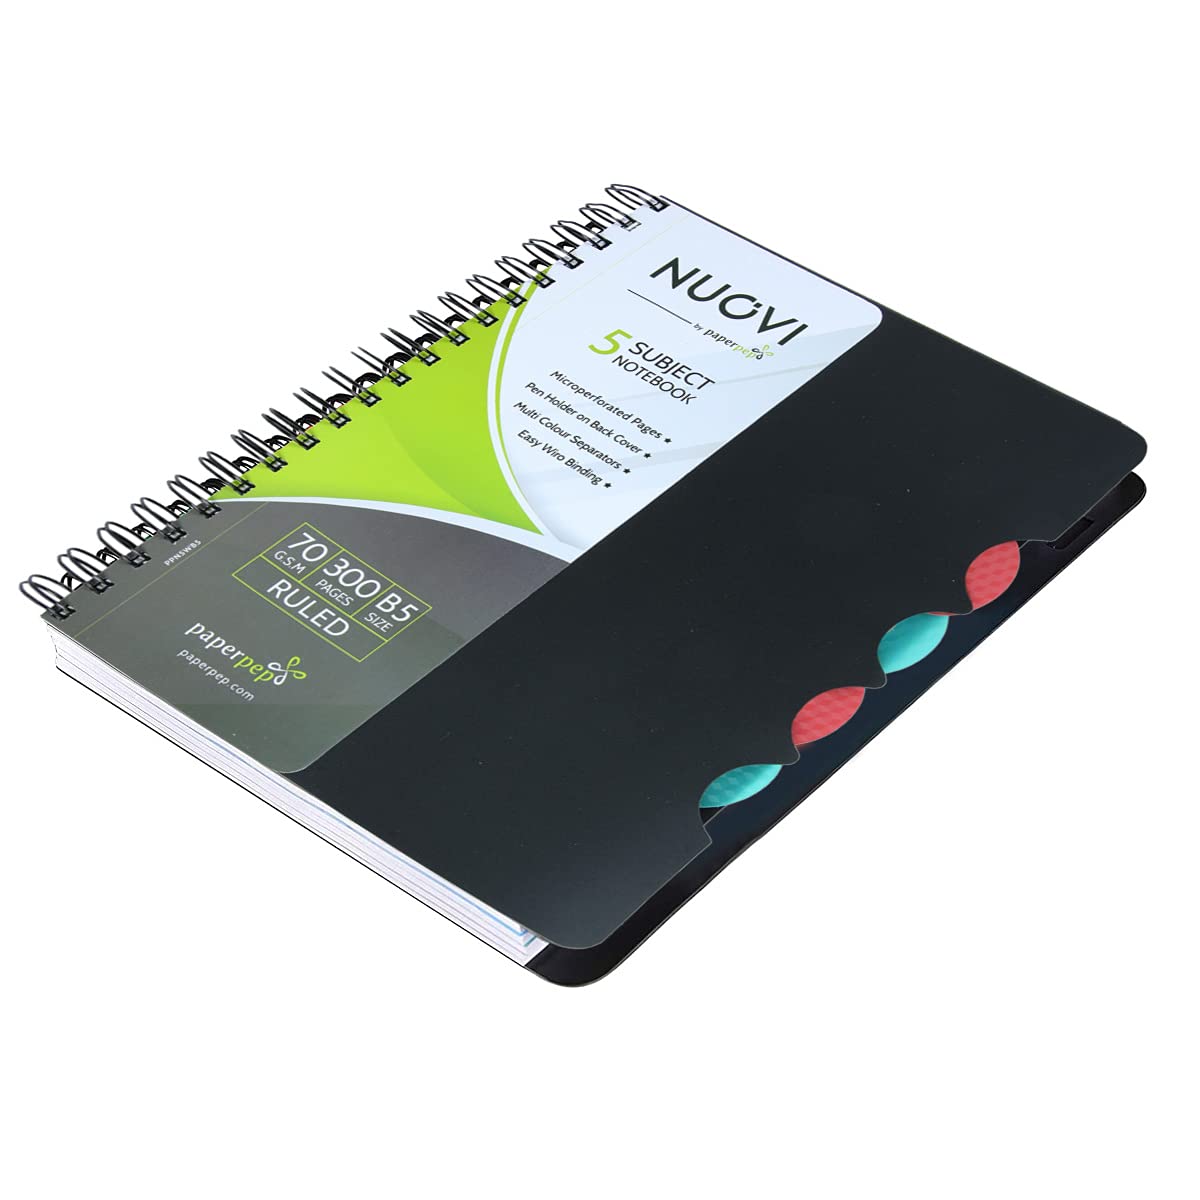 Paper Pep Nouvi 5 Subjects Single Ruled 70GSM 300 Pages B5 Notebook (Pack of 2)